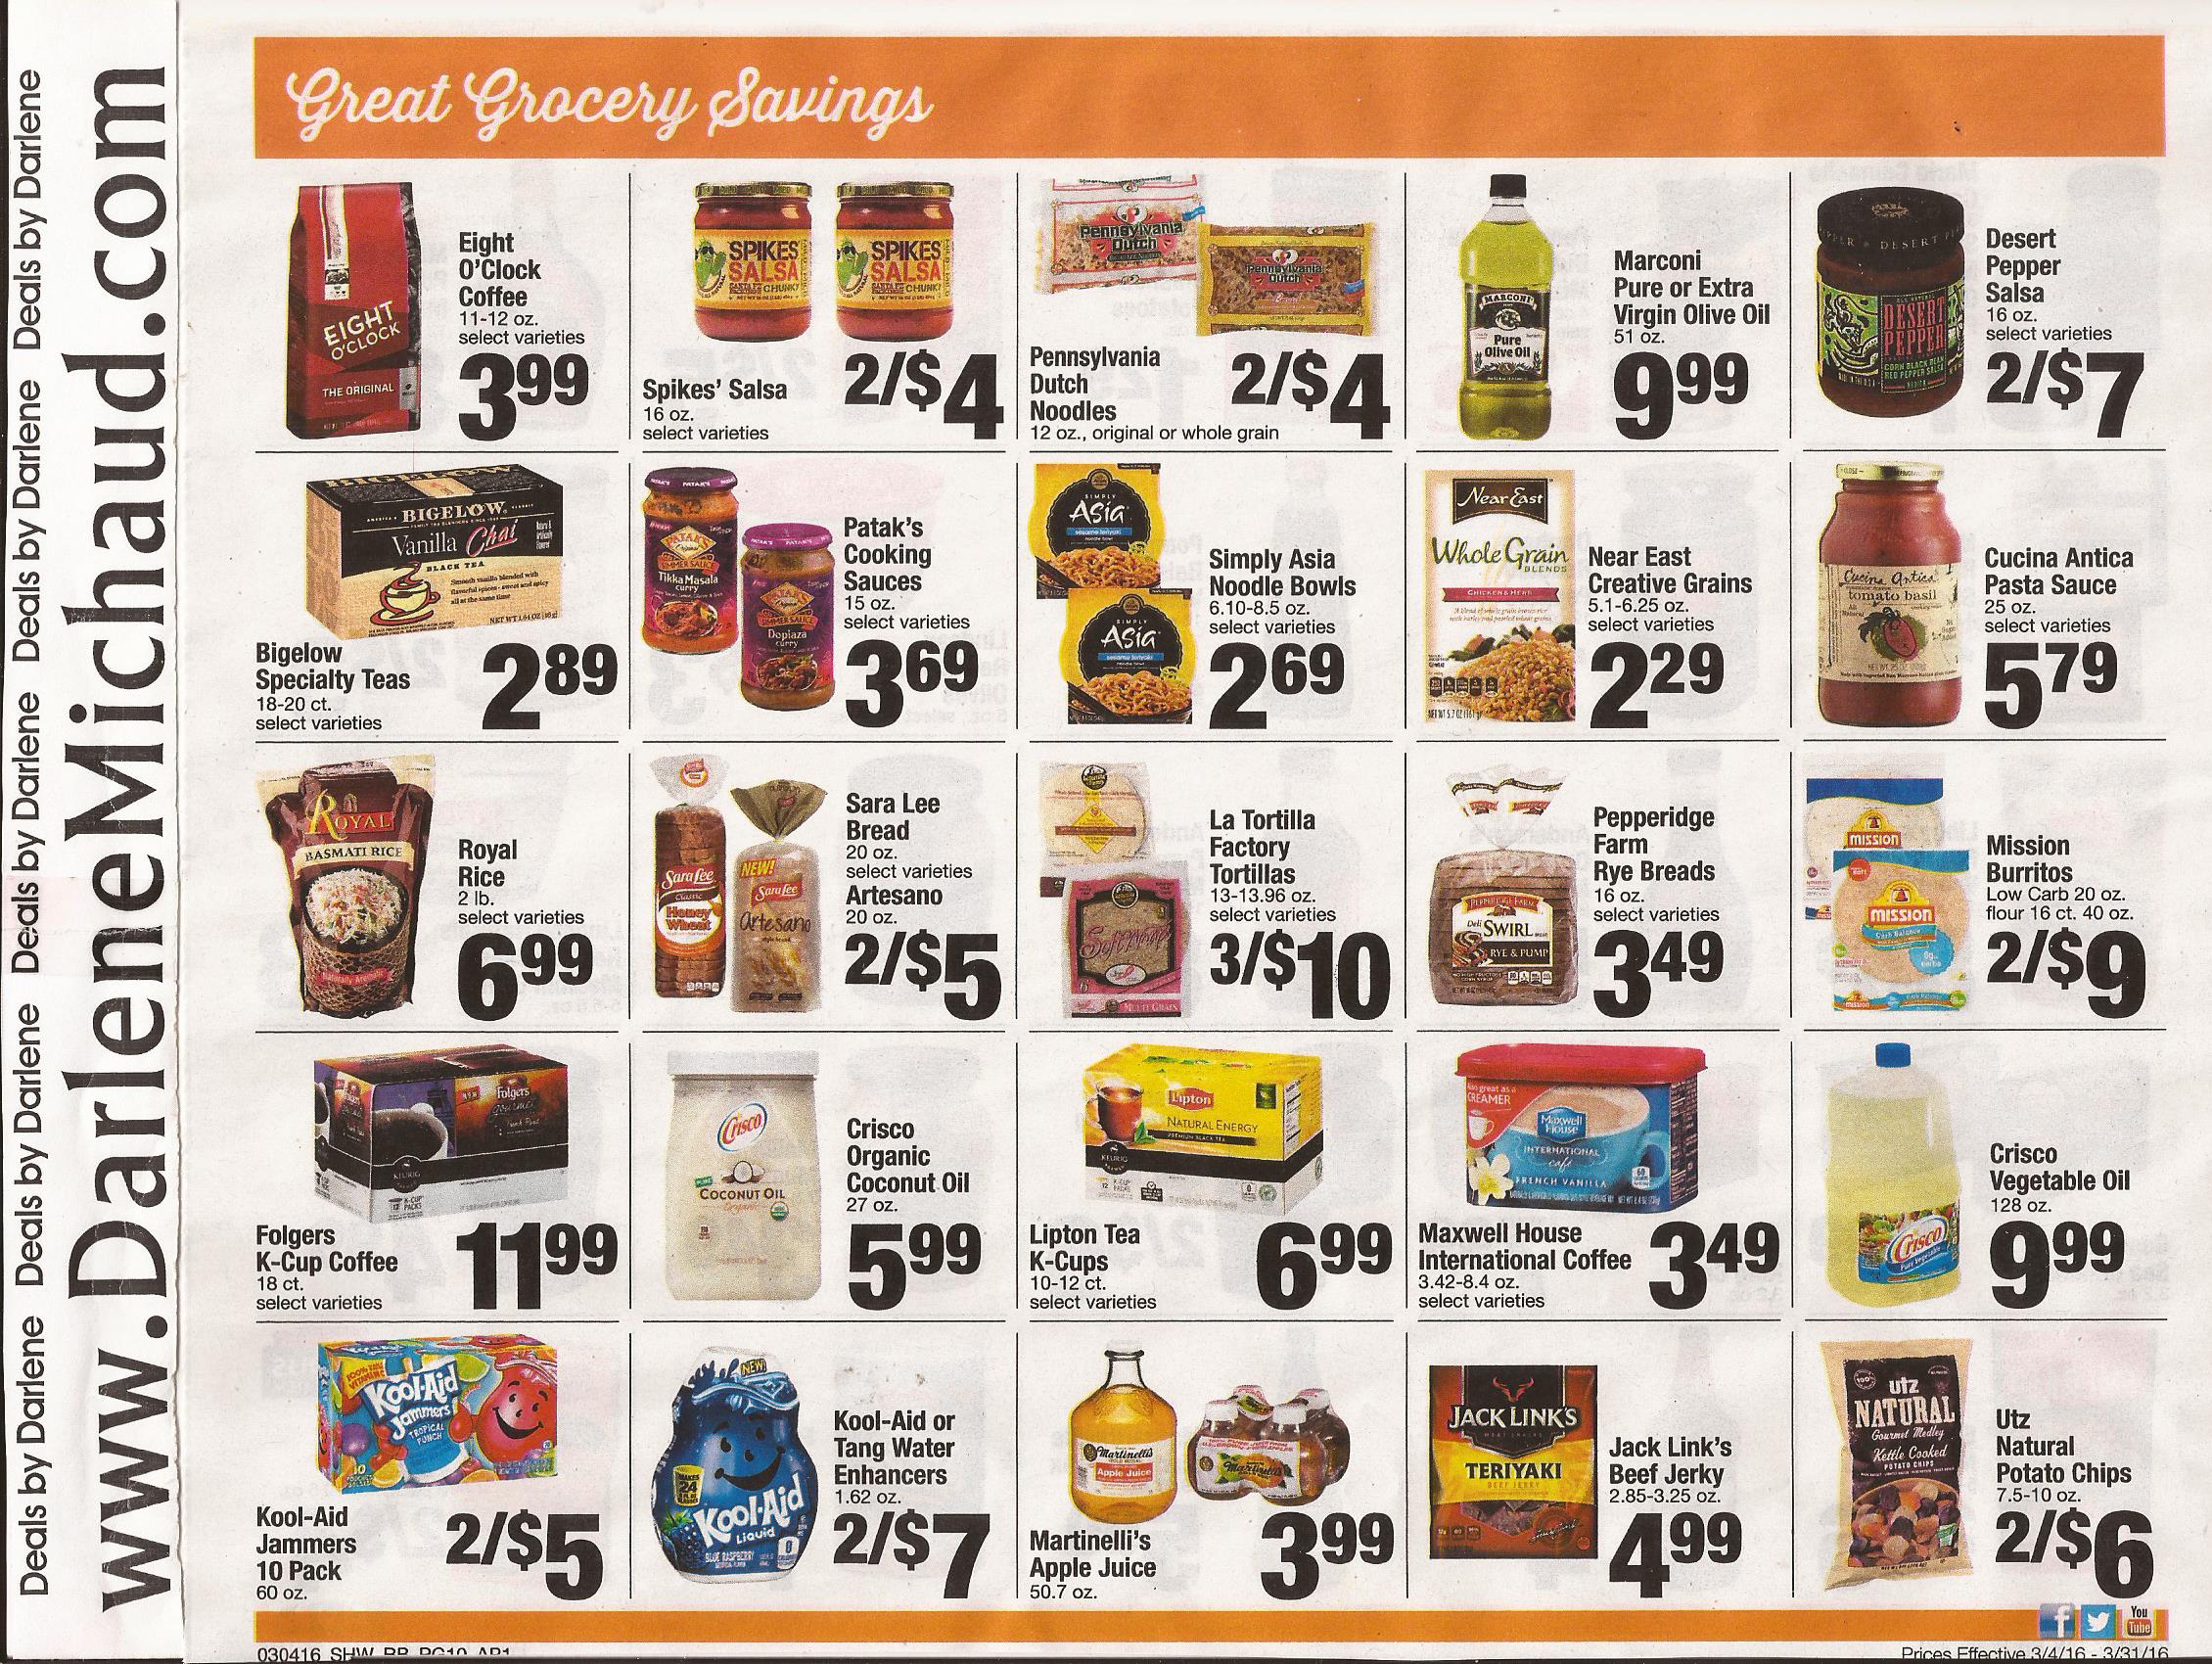 shaws-big-book-savings-march-4-march-31-page-10